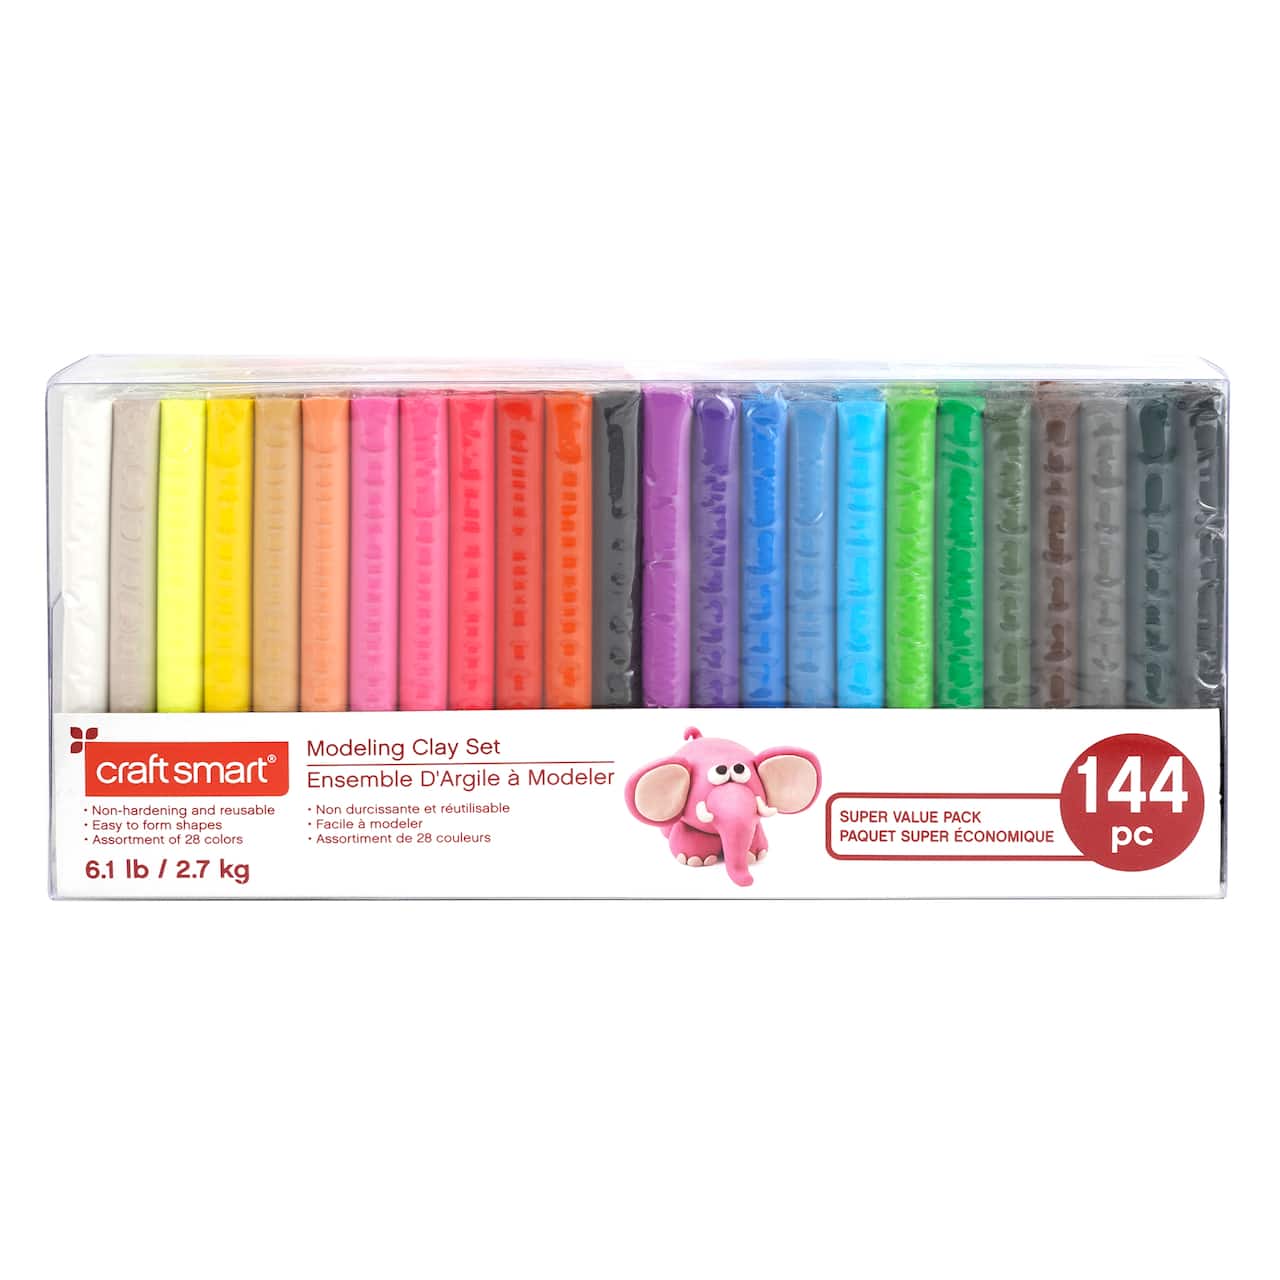 6.1lb. Modeling Clay Set by Craft Smart®